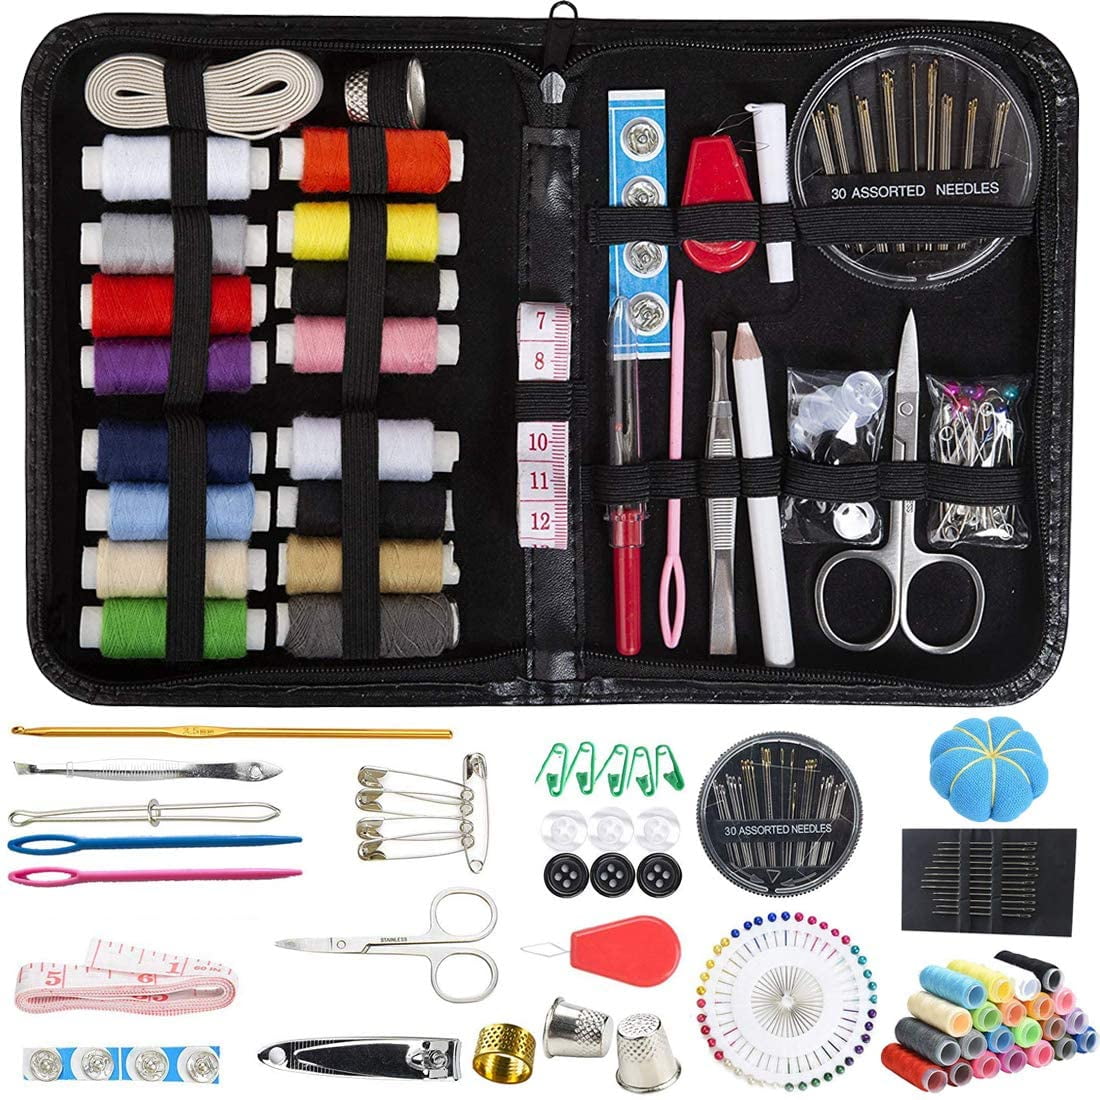 JUNSHUO Sewing Kit,Essential Sewing Tools Kit Needlework Box Set，Premium Sewing Supplies with PU Case Suitable for Home Travel and Emergency Use with Scissors,Thimble,Thread,Needle Black 